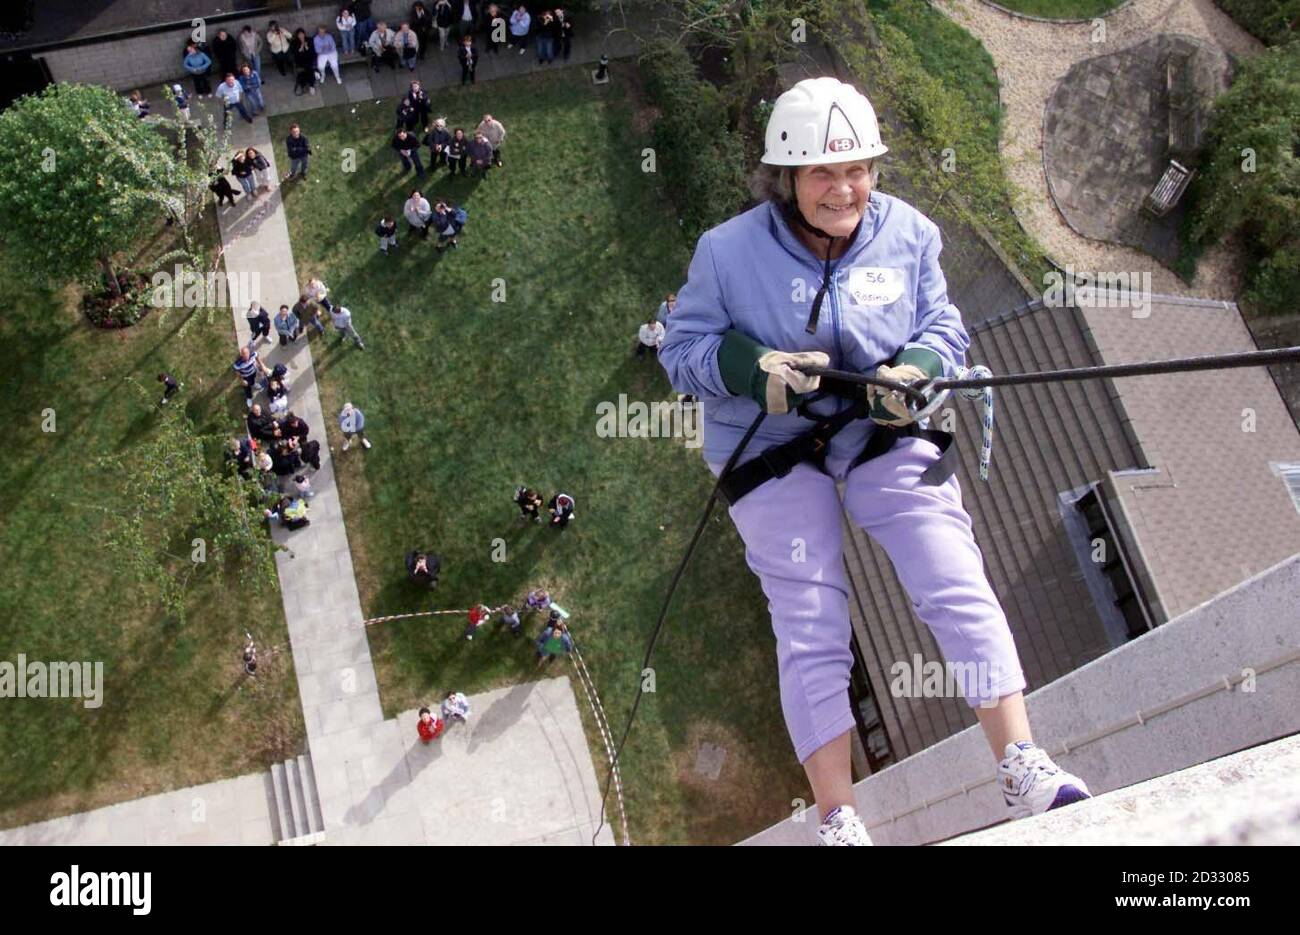 88-year-old Rosina Burson from Abbey Wood, south London, abseils from St Nicholas house at the Queen Elizabeth hospital in Woolwich, south London to raise money for Macmillan cancer relief.  Stock Photo